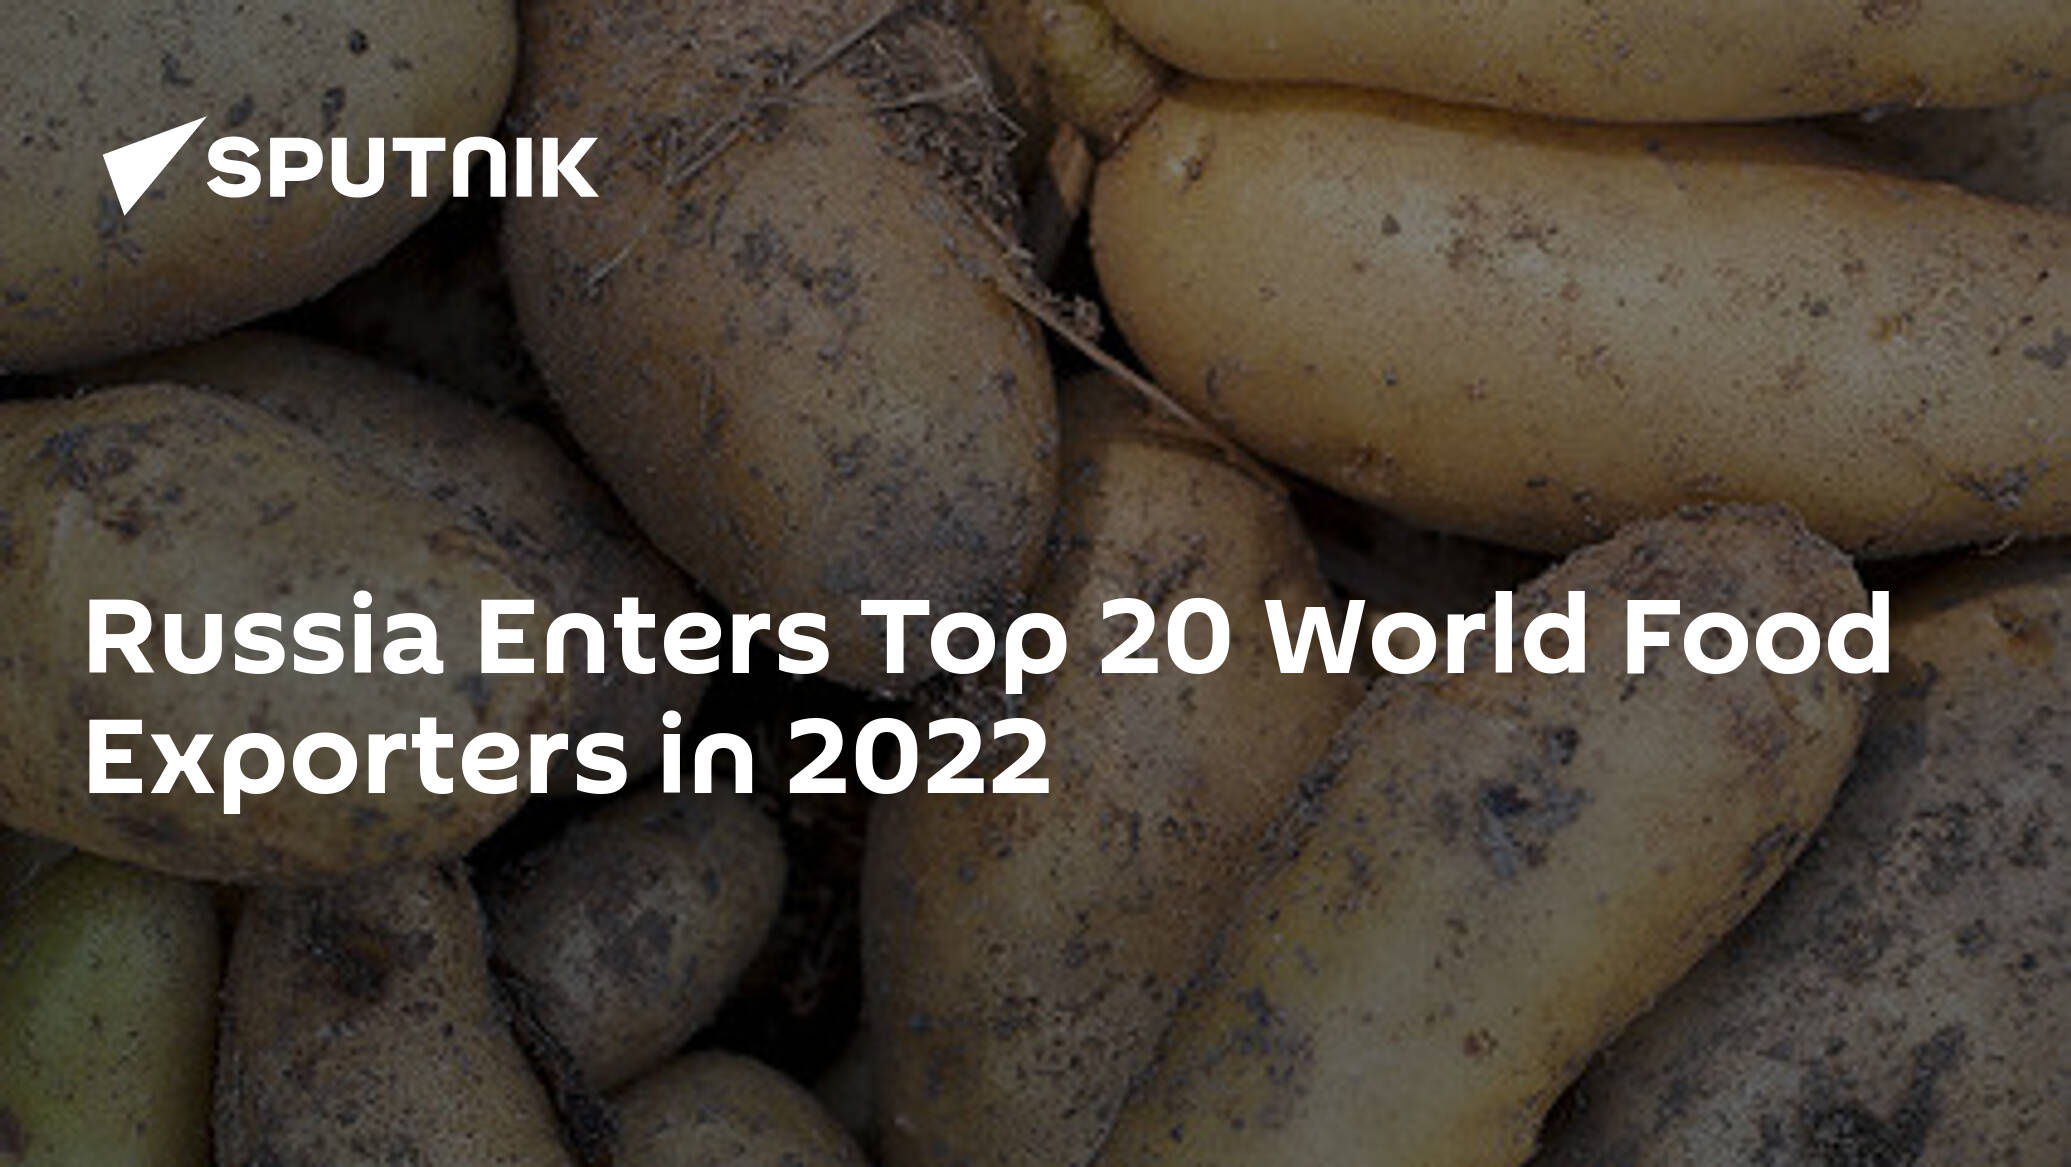 Russia Enters Top 20 World Food Exporters in 2022